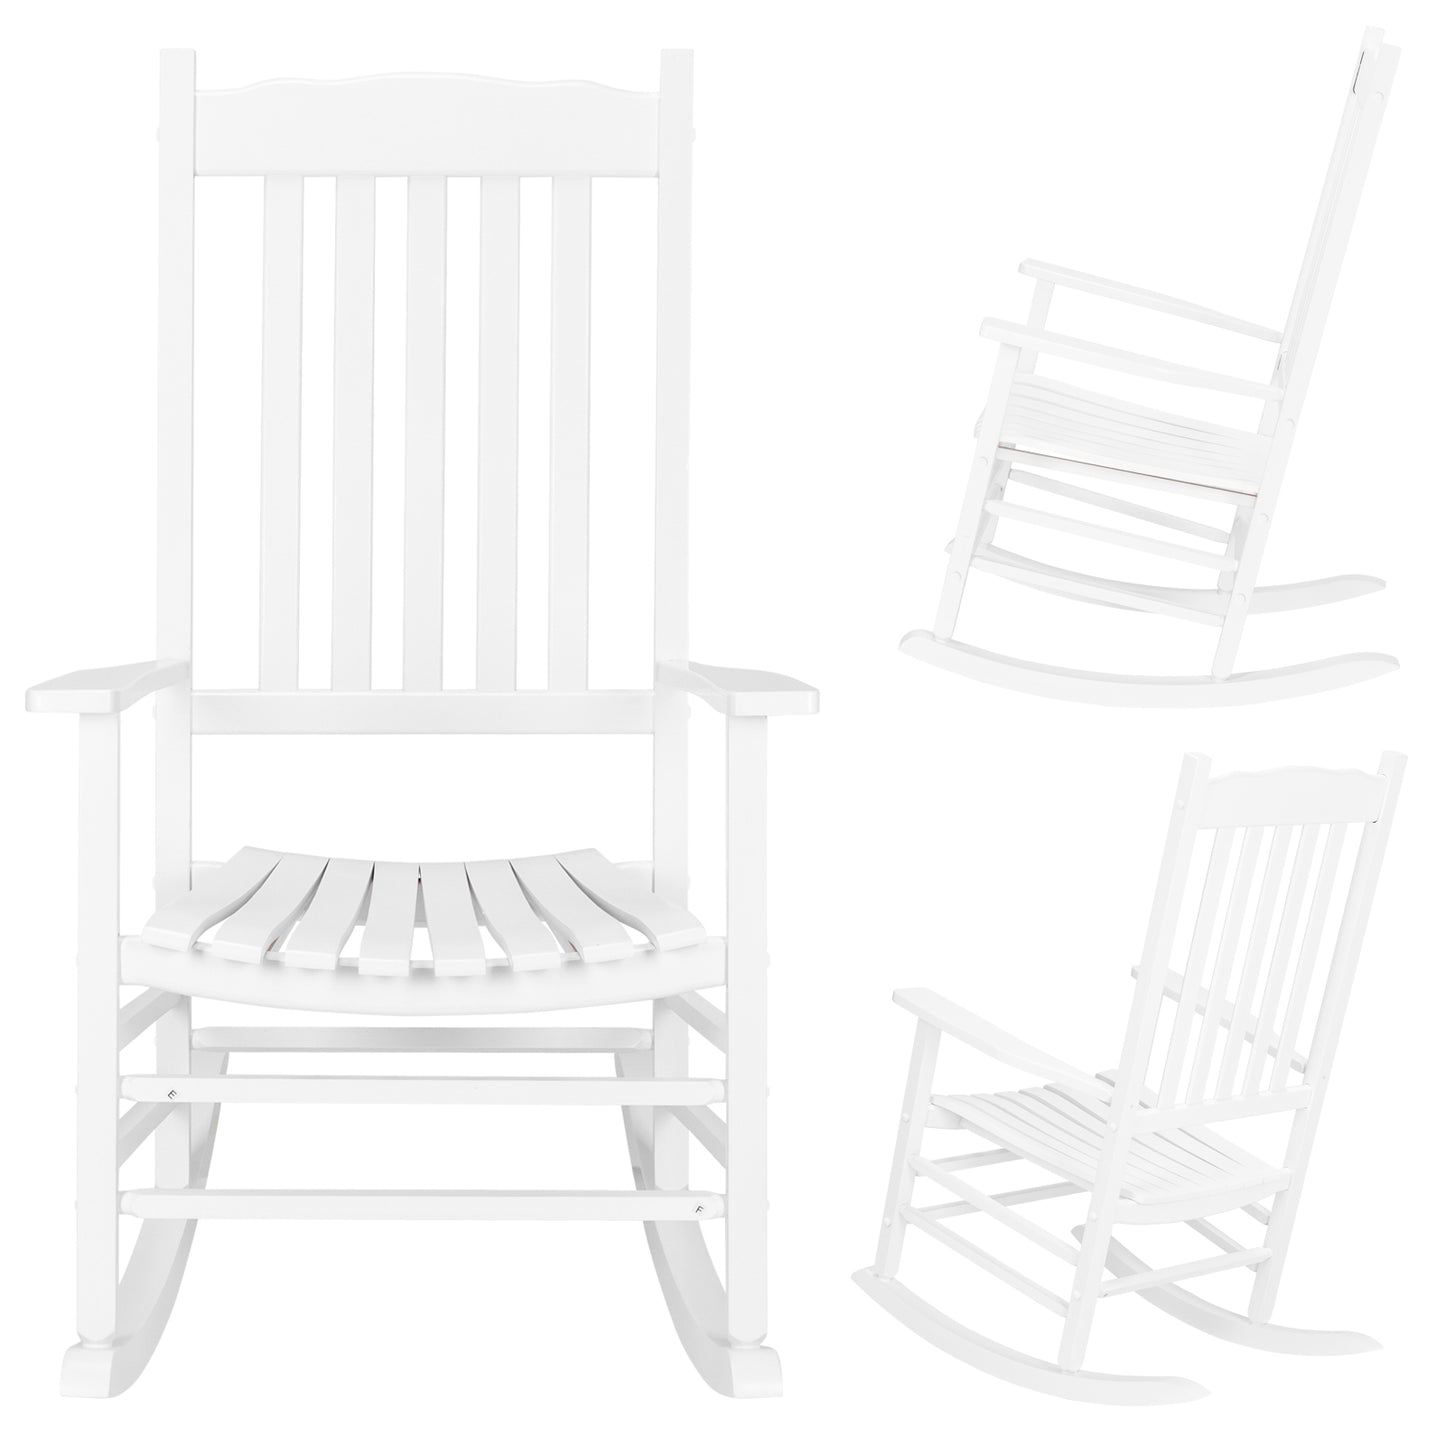 68.5*86*115CM Square Wooden Rocking Chair Wavy Backboard White